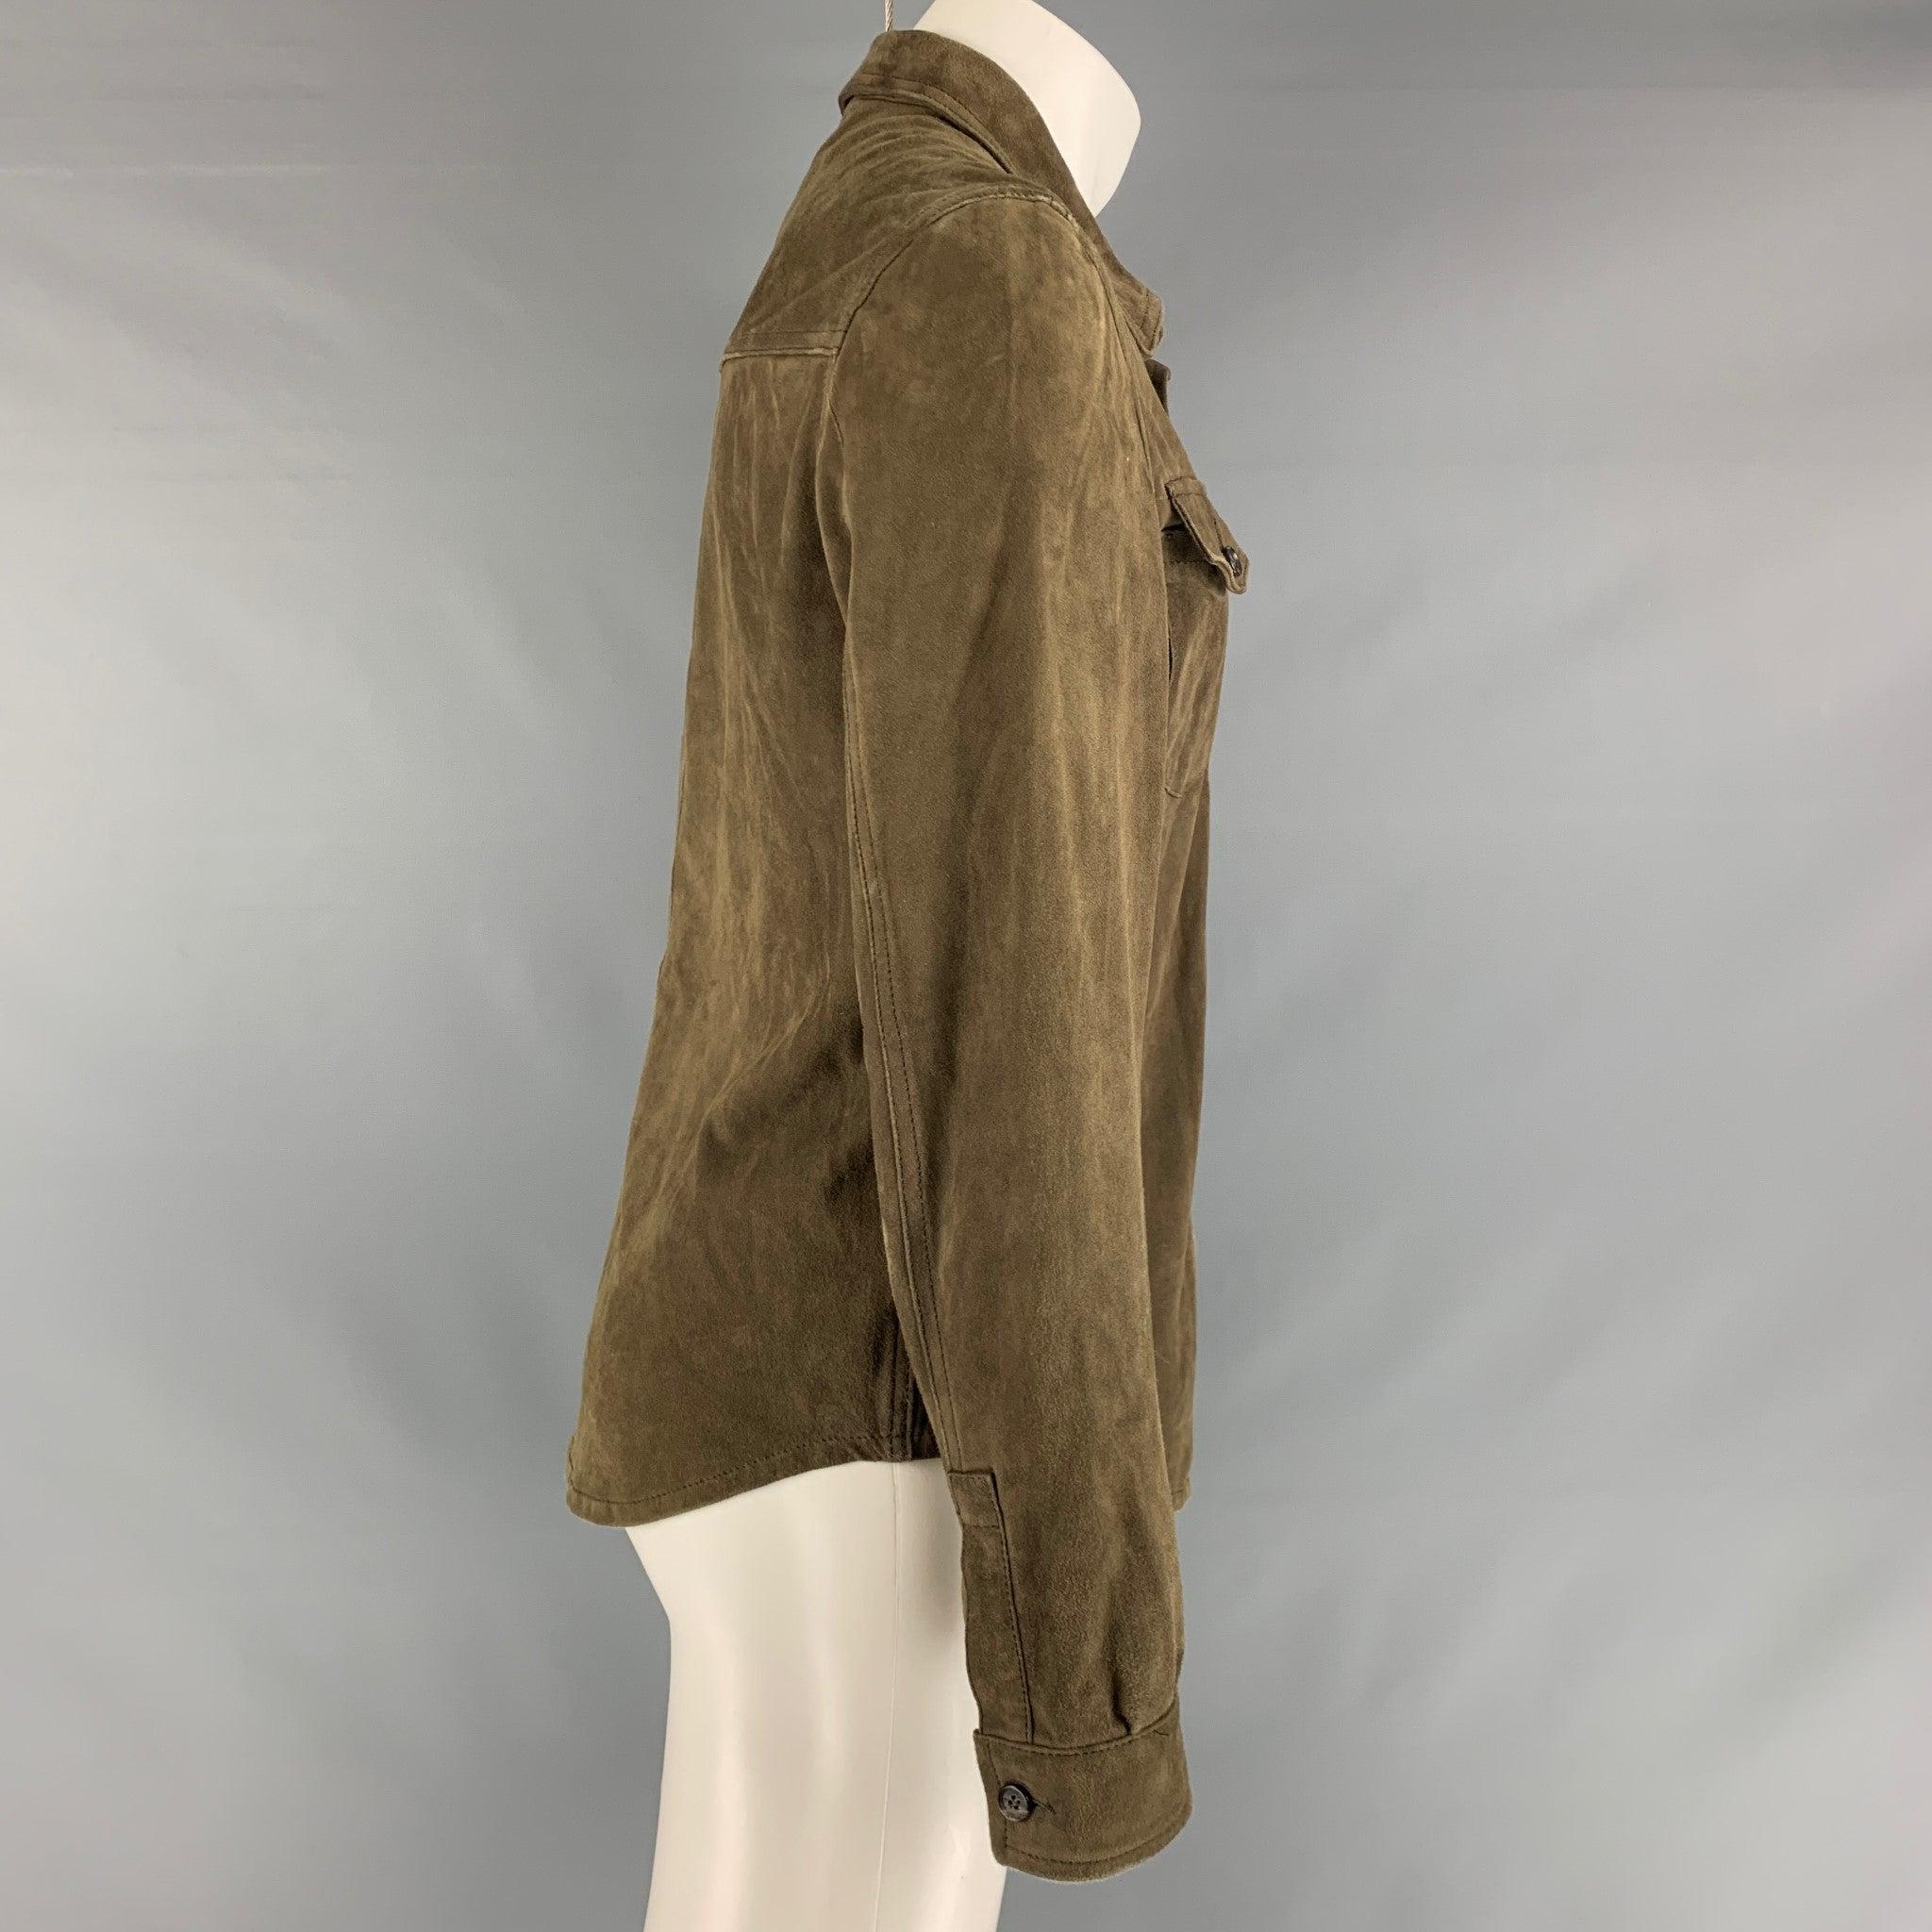 ISAIA jacket come in olive solid leather featuring a straight collar, flap pockets, and button down closure. Made in Italy.Very Good Pre-Owned Condition. Moderate signs of wear. 

Marked:   50 

Measurements: 
 
Shoulder: 19 inches Chest: 42 inches